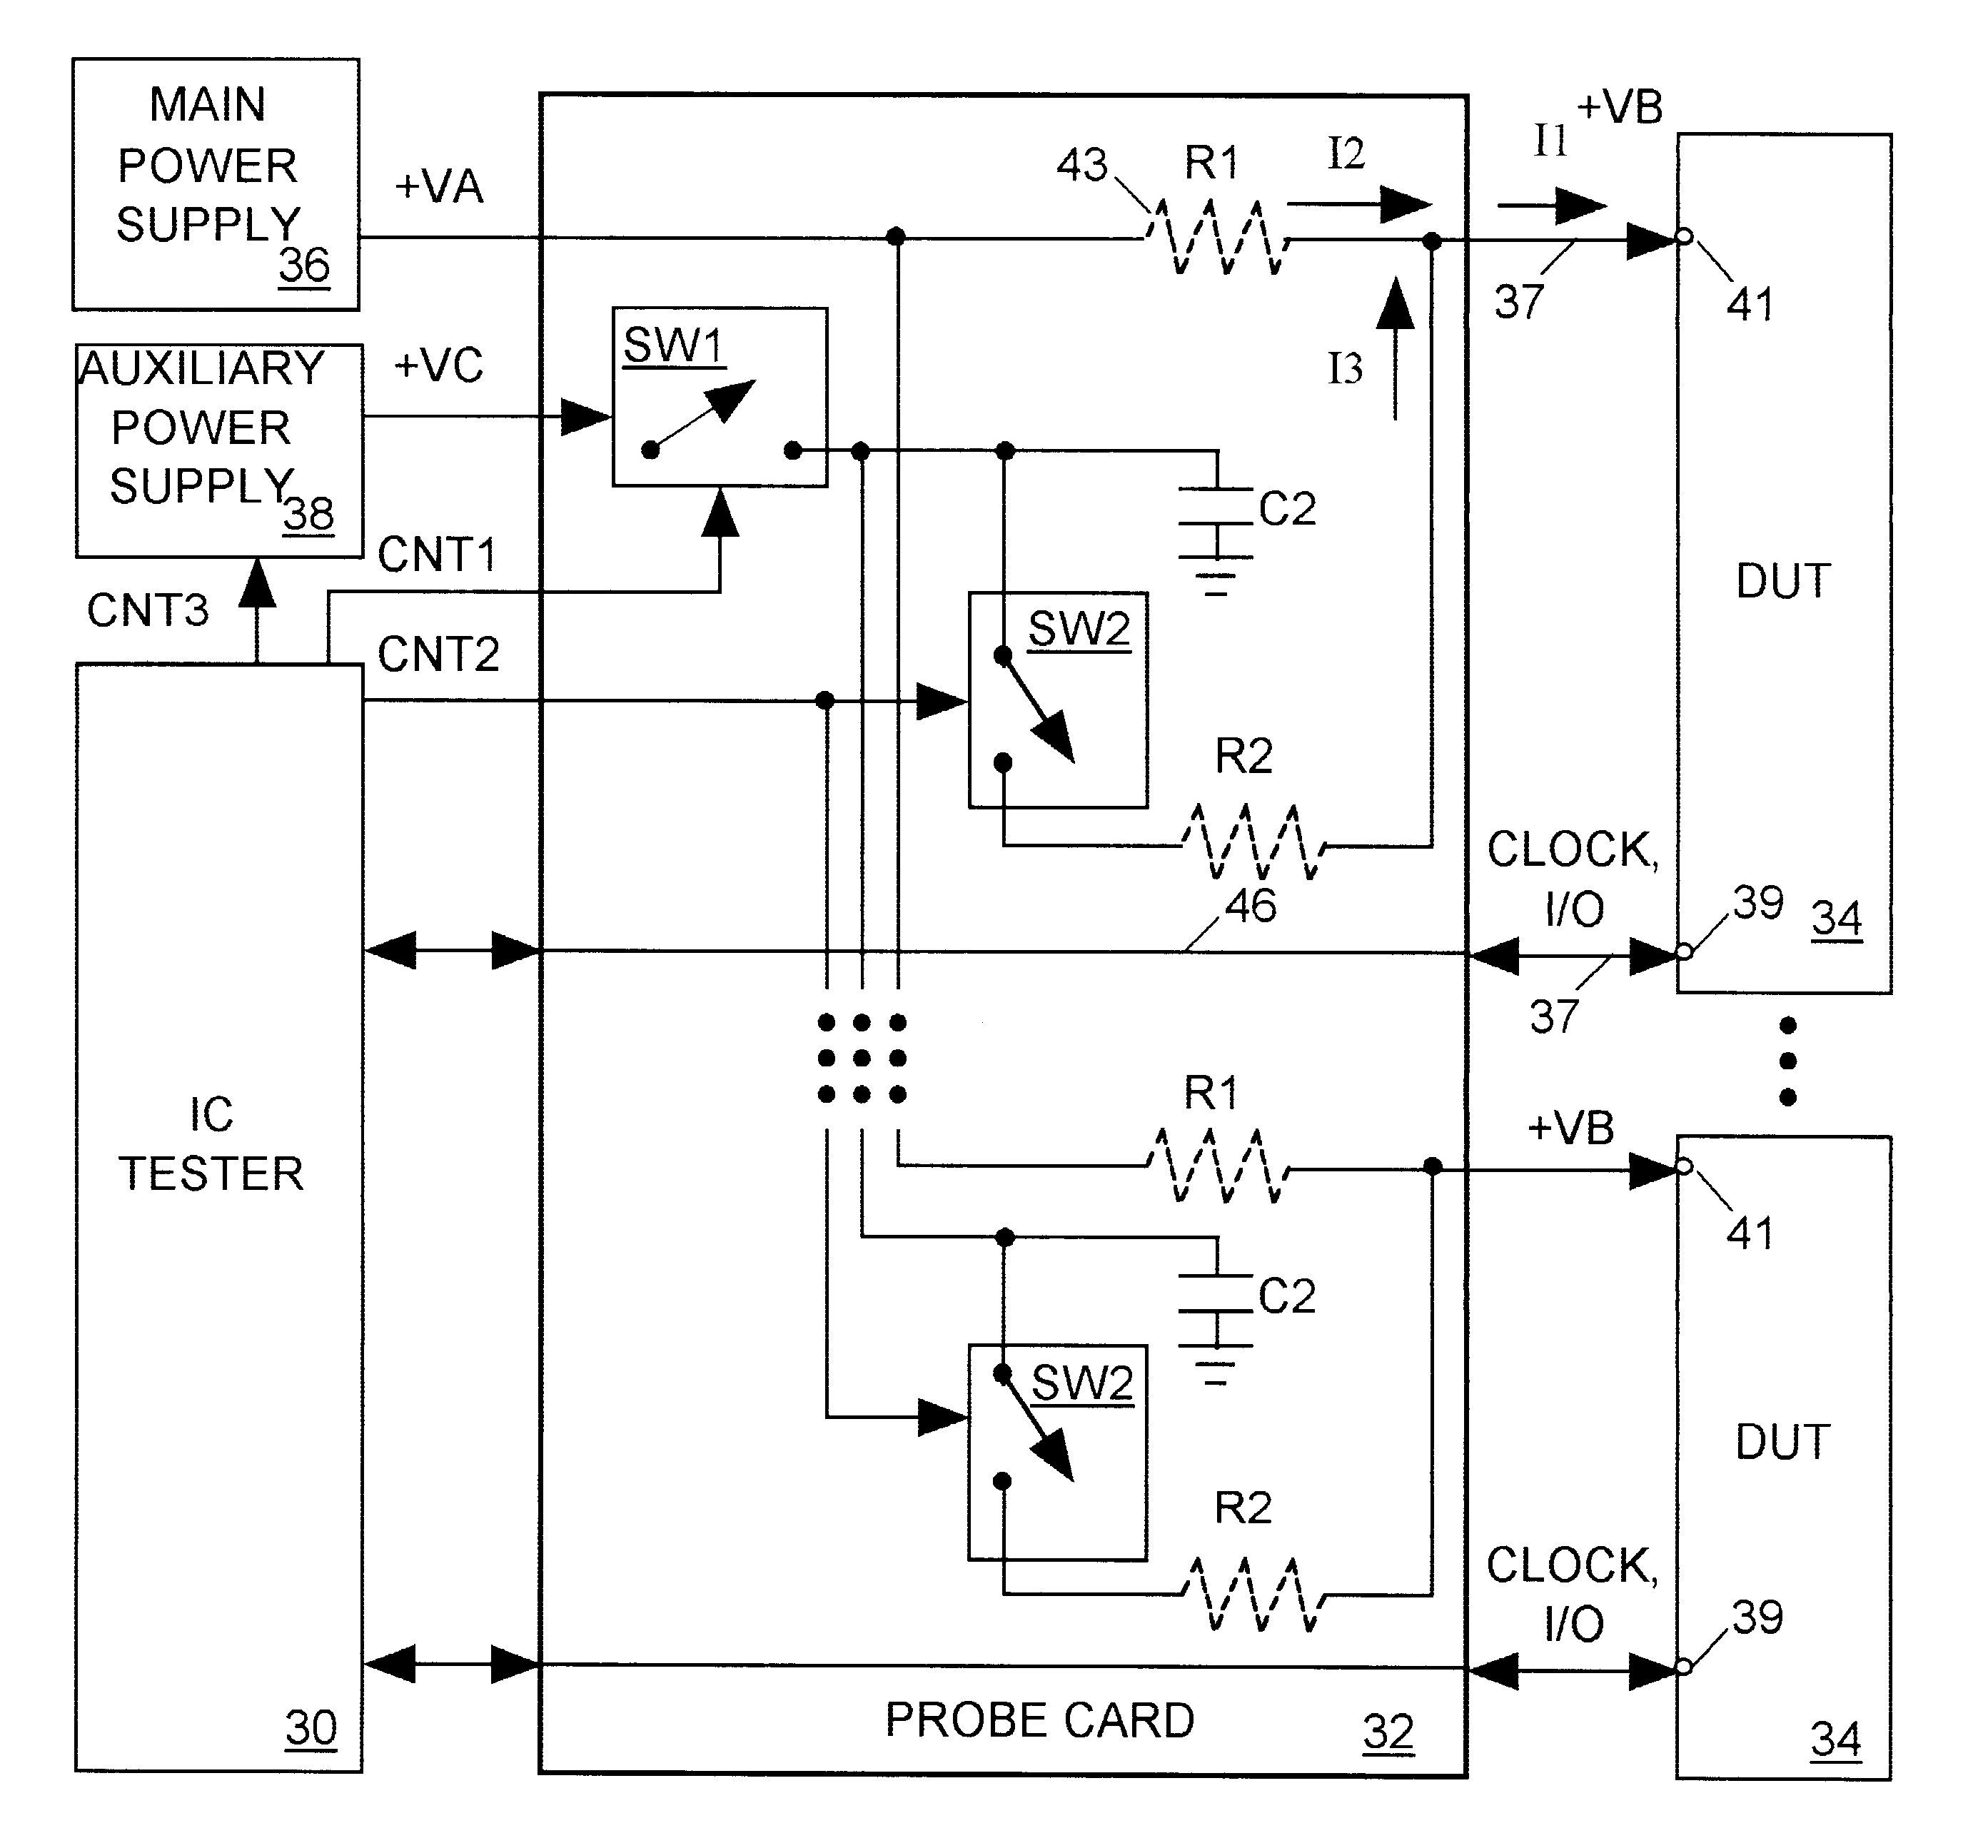 Predictive, adaptive power supply for an integrated circuit under test